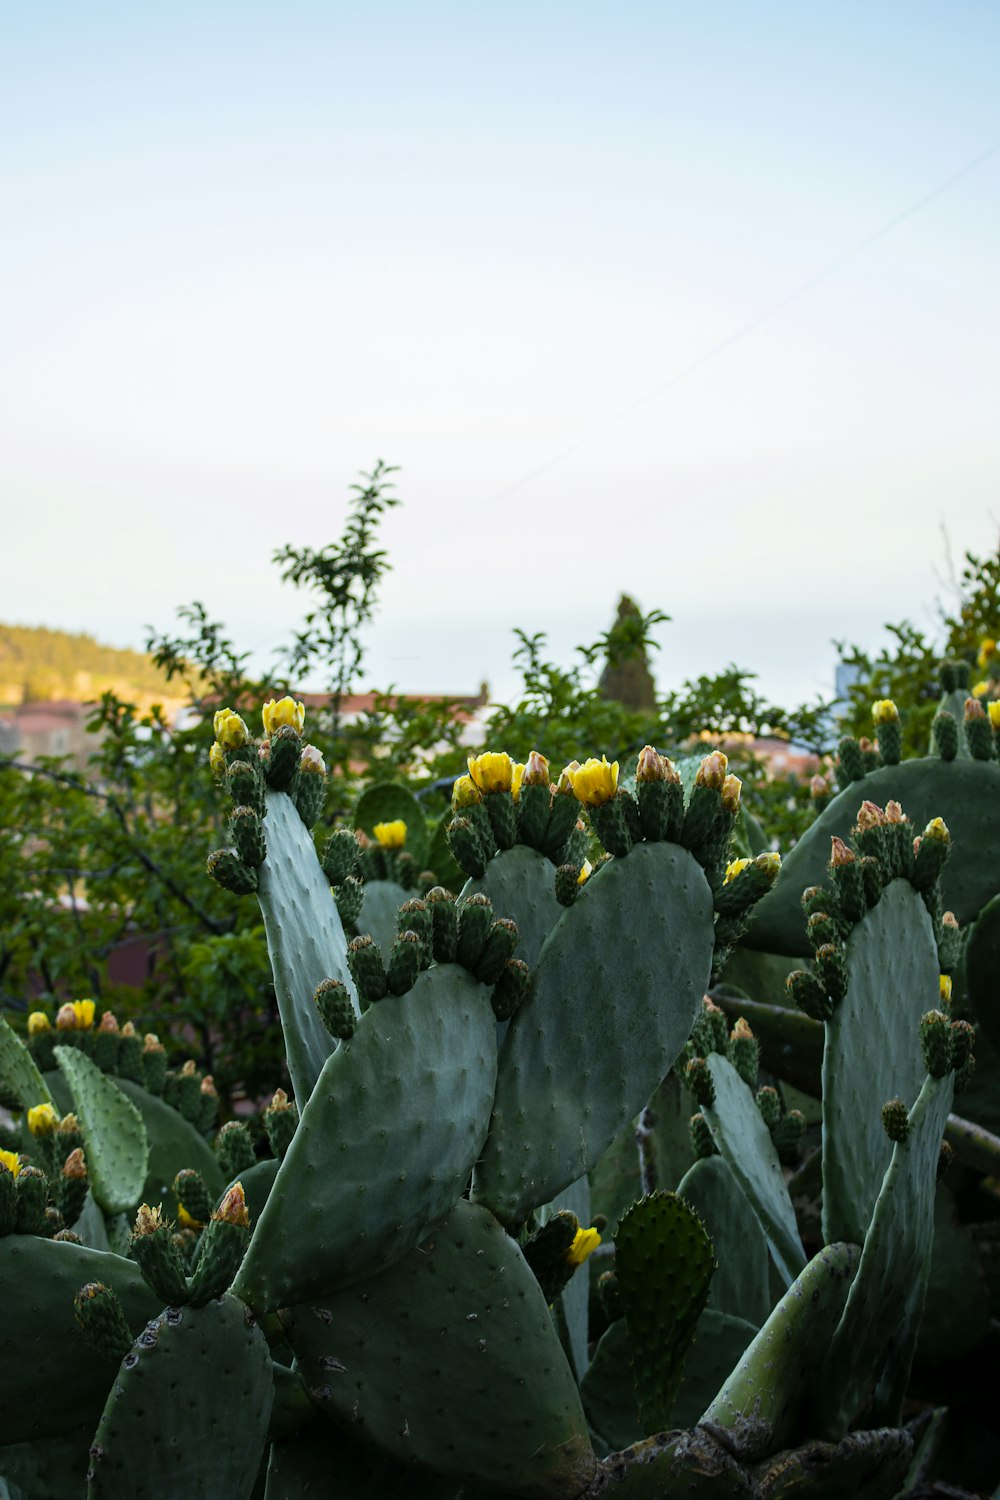 a bunch of cactus plants with yellow flowers